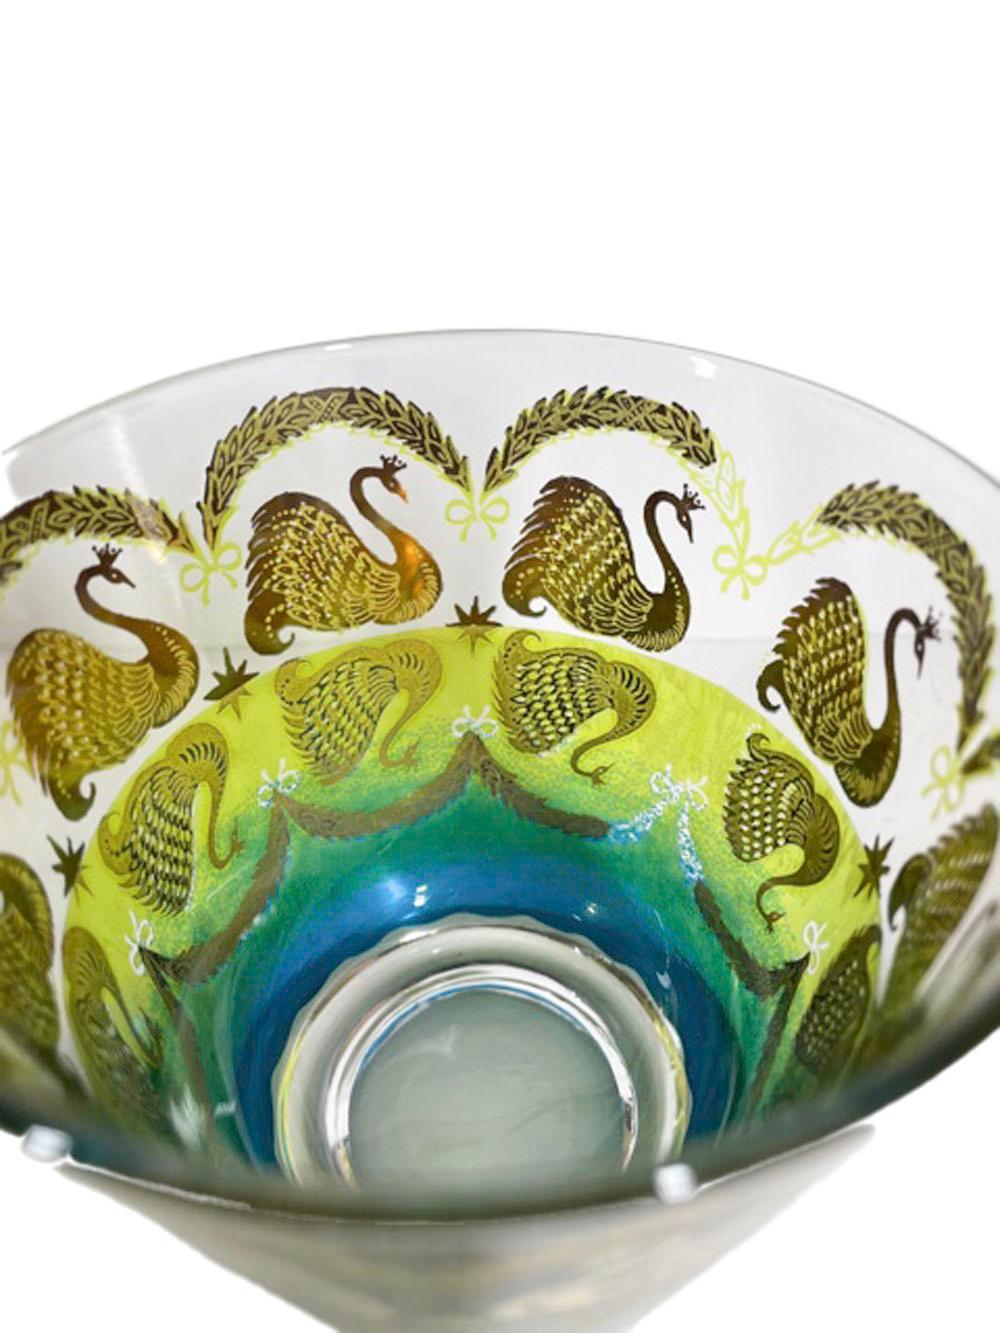 Eight old fashioned glasses made by Cera Glassware and decorated in 22k gold with swans swimming below arched floral swags, the water created with yellow and blue translucent enamels combining to create green through the center. An inverted image of